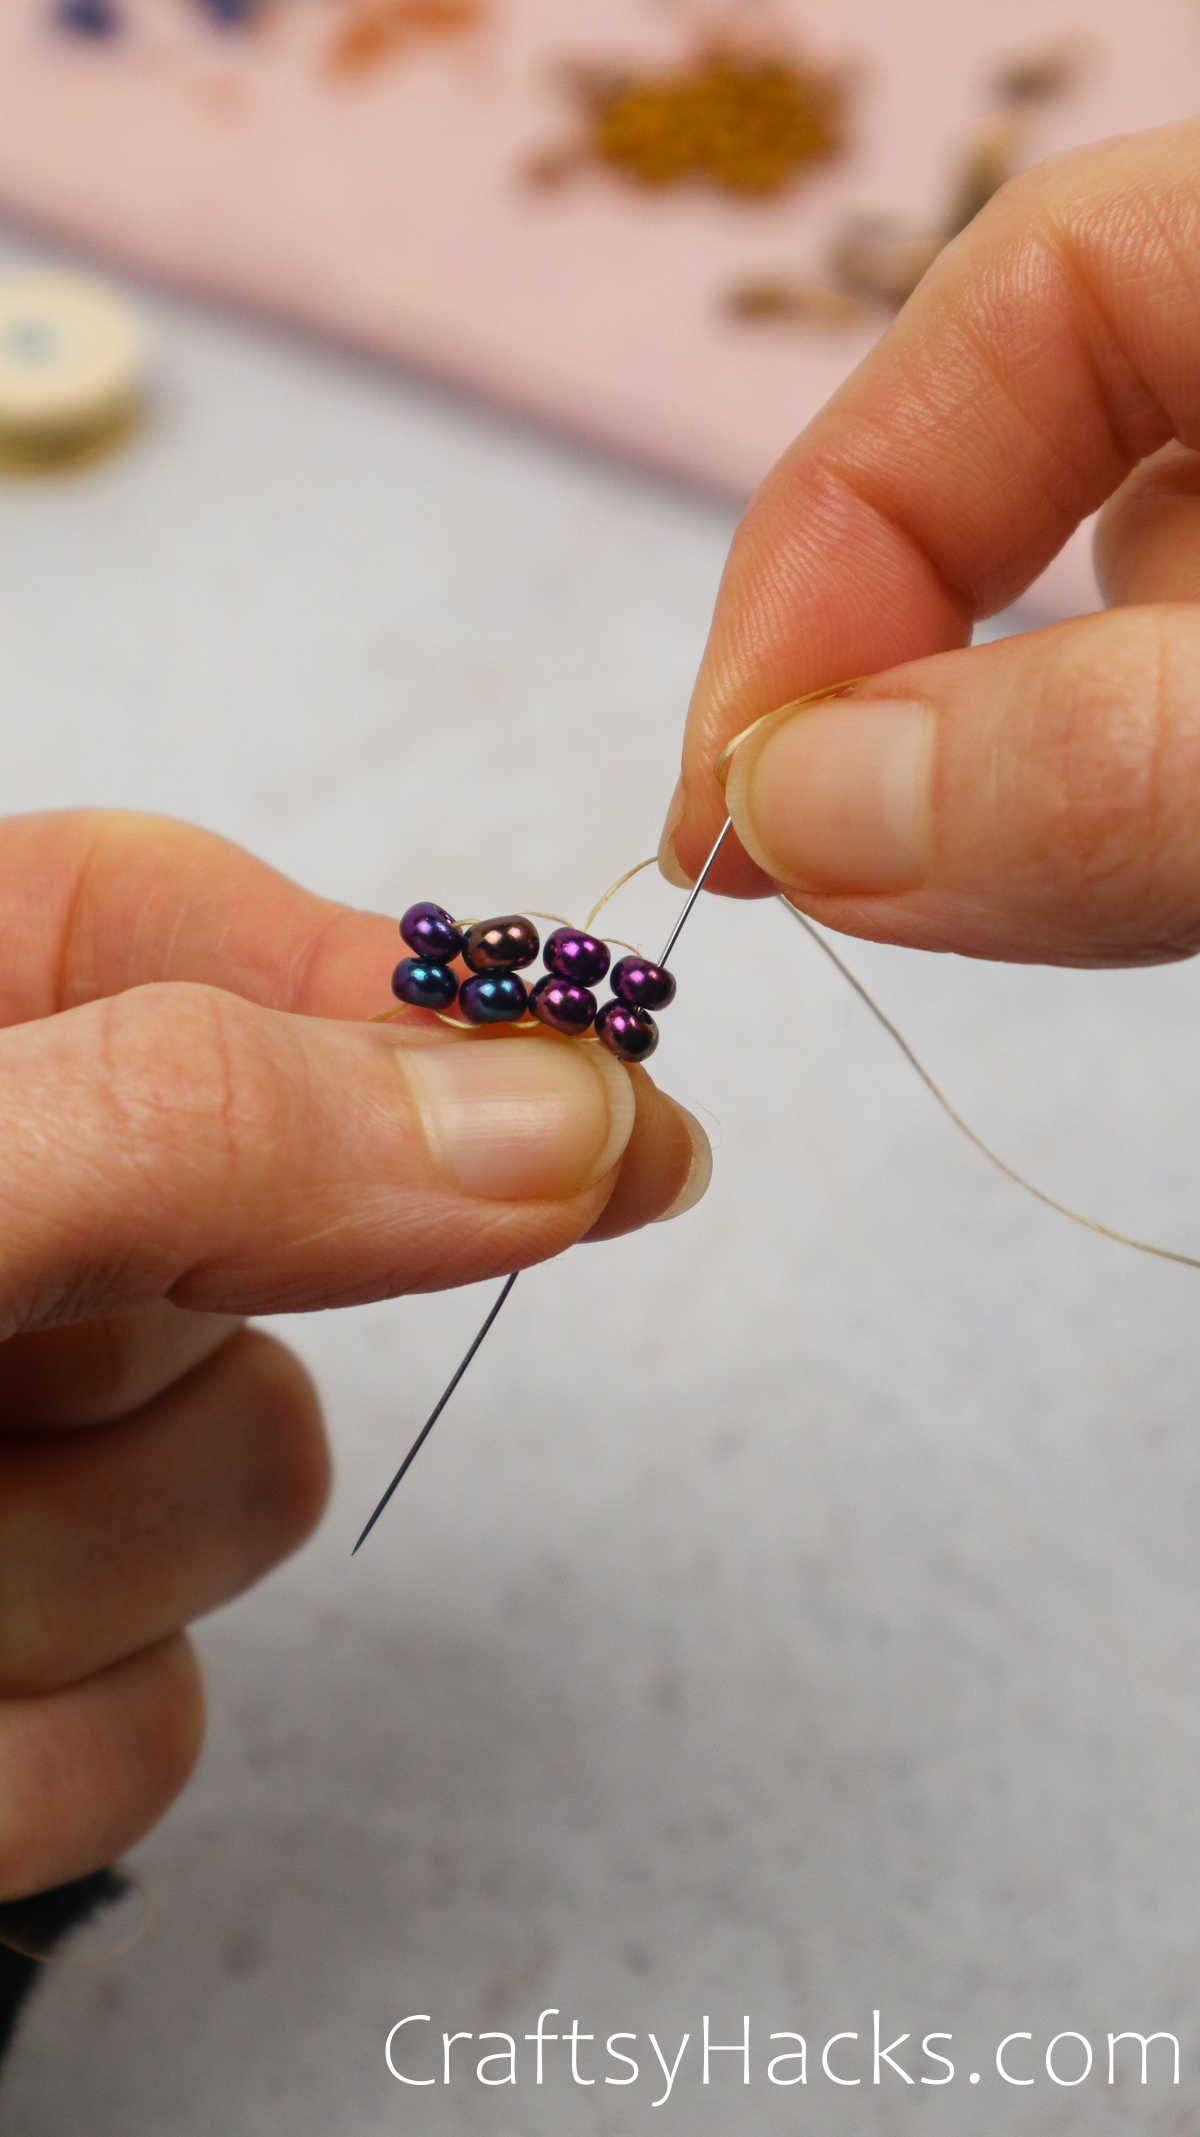 forming a full ladder with the beads